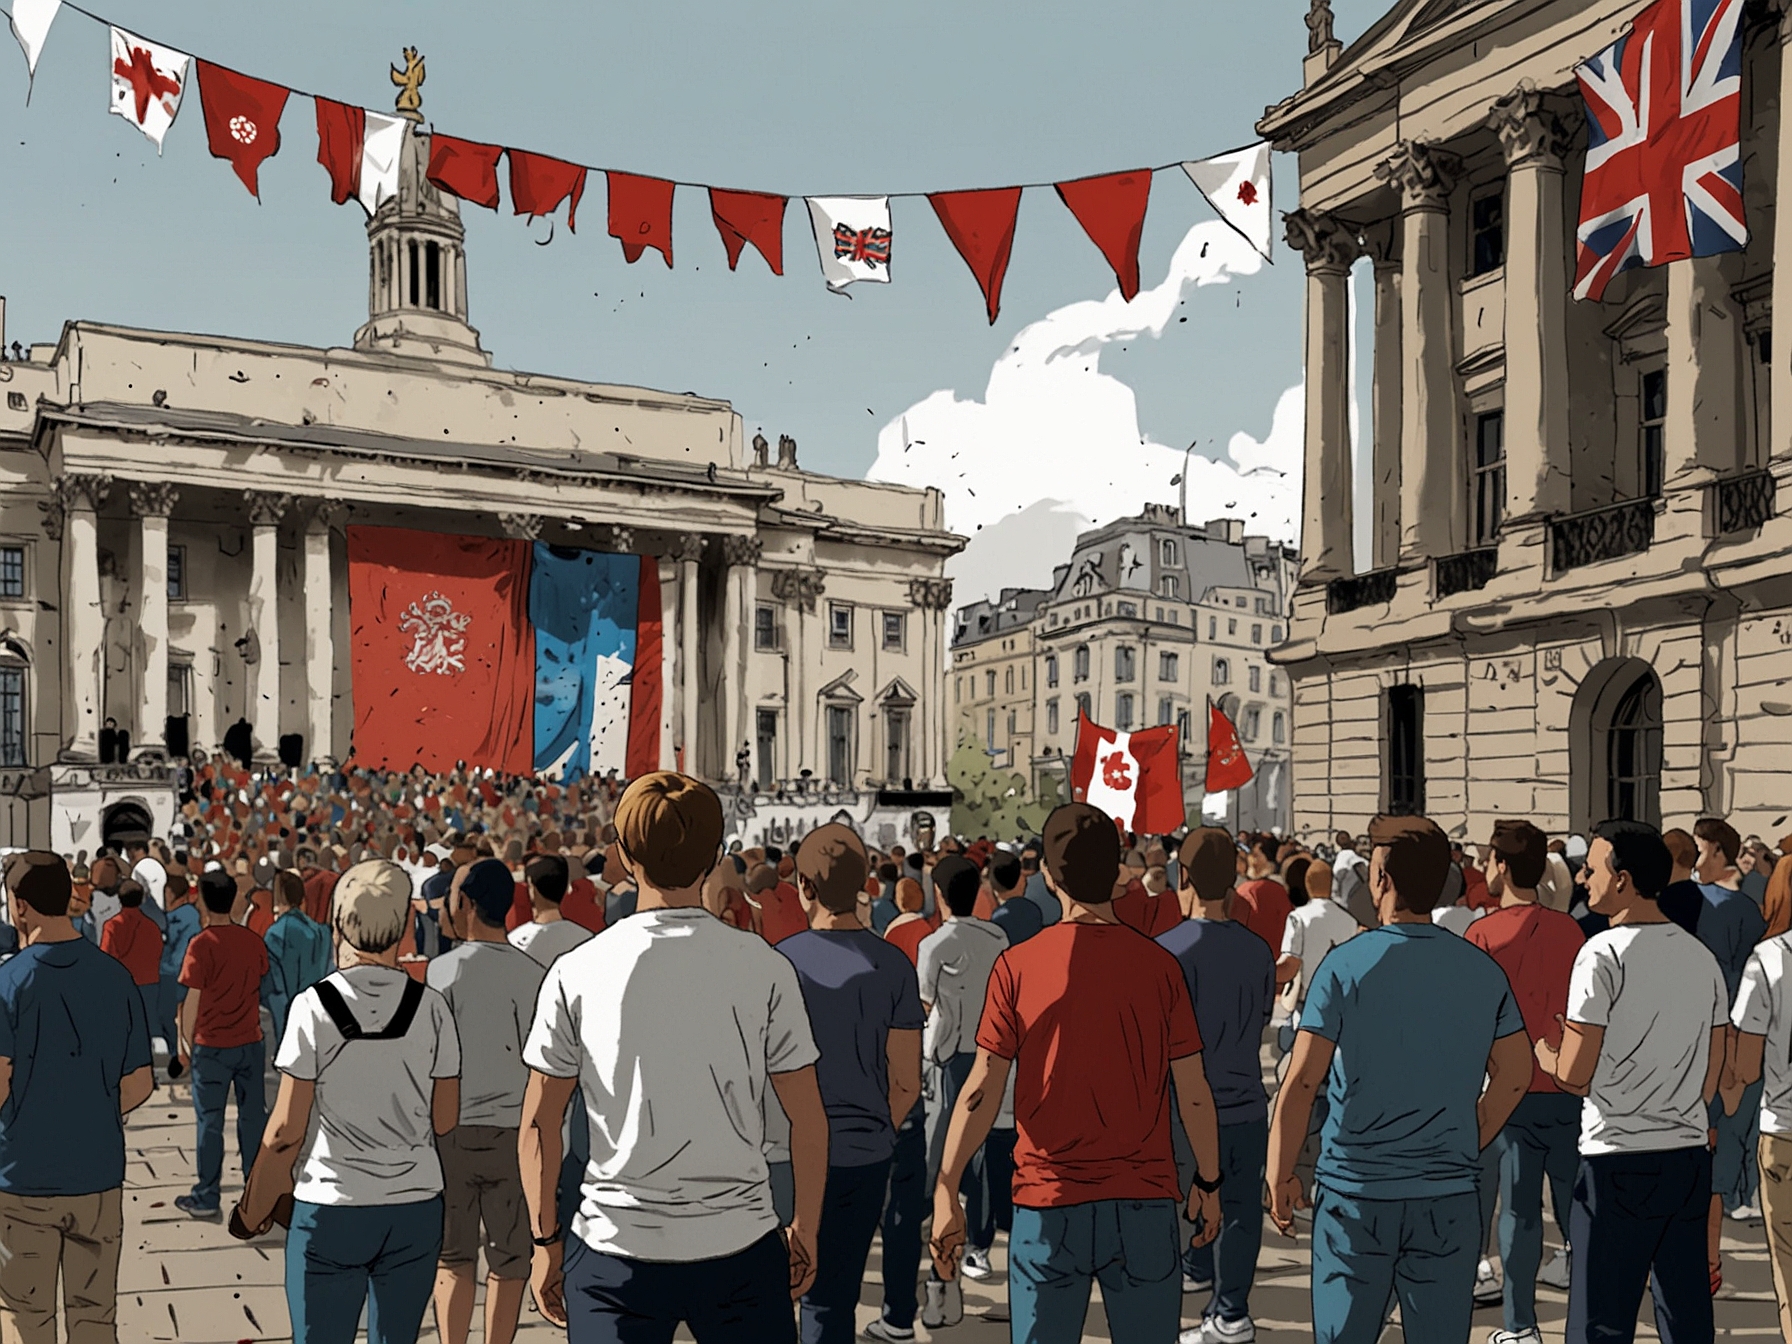 England fans packed Trafalgar Square wearing national jerseys and waving flags, watching the Euro 2024 match on large screens, with street vendors and performers adding to the festive atmosphere.